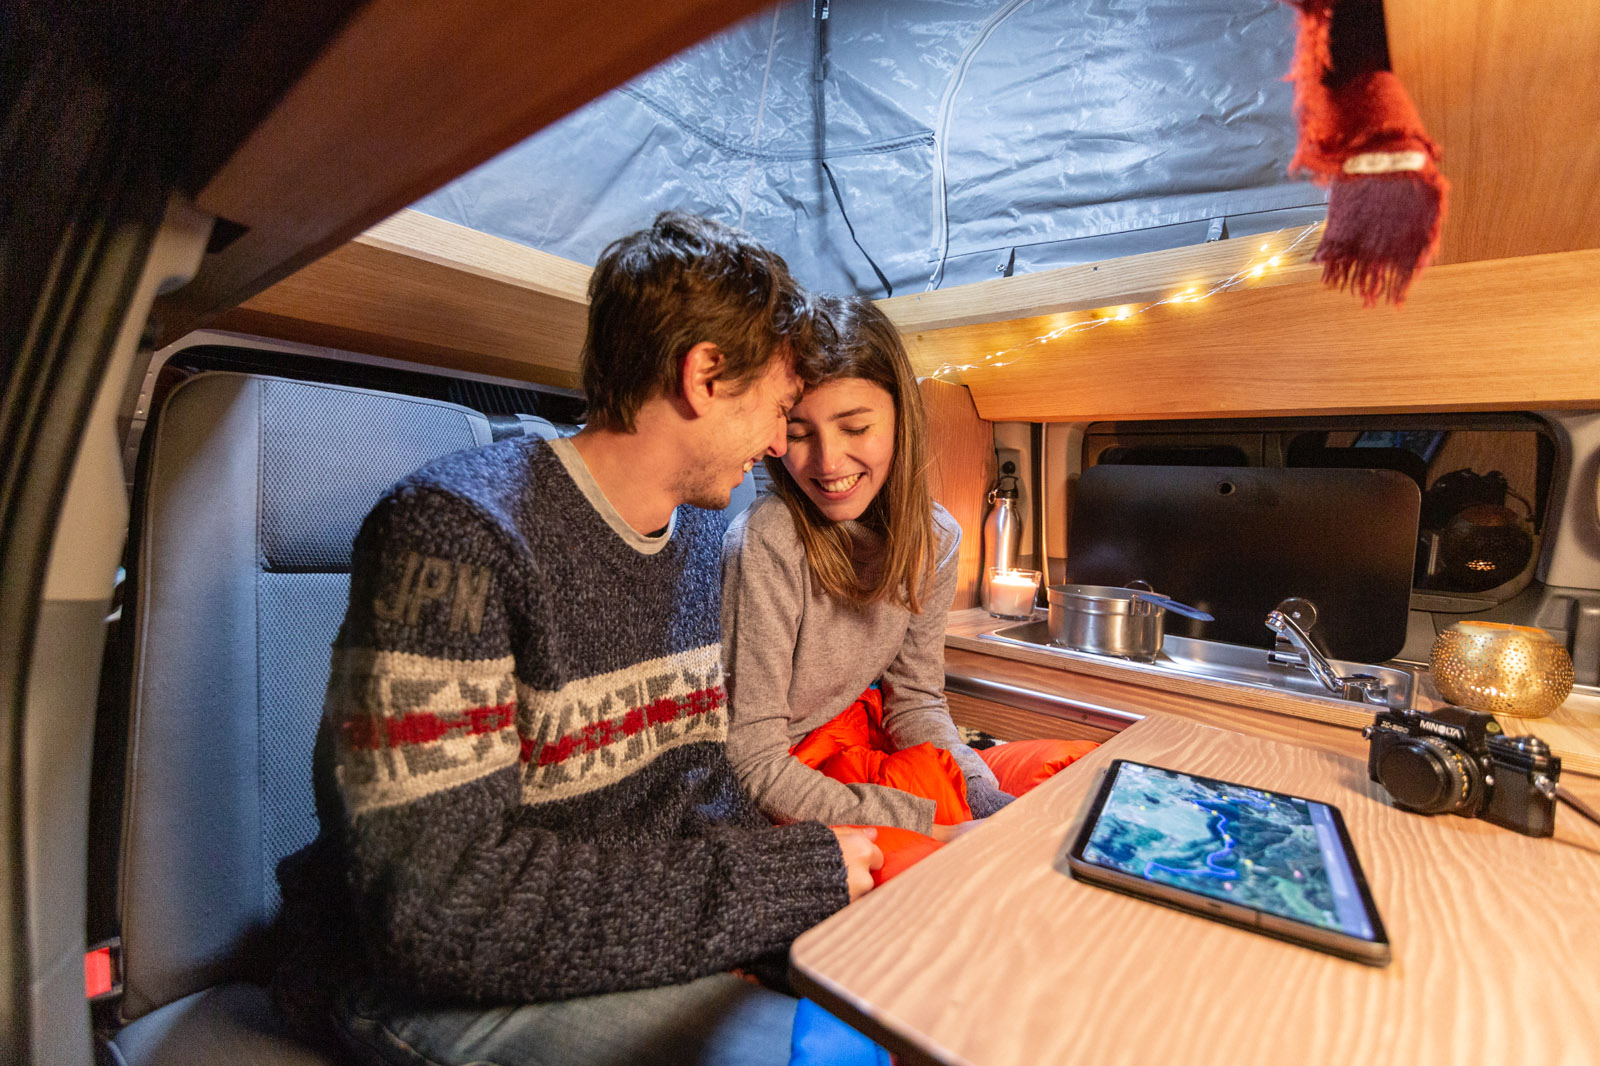 Nissan e-NV200 Winter Camper is rugged electric mobile home